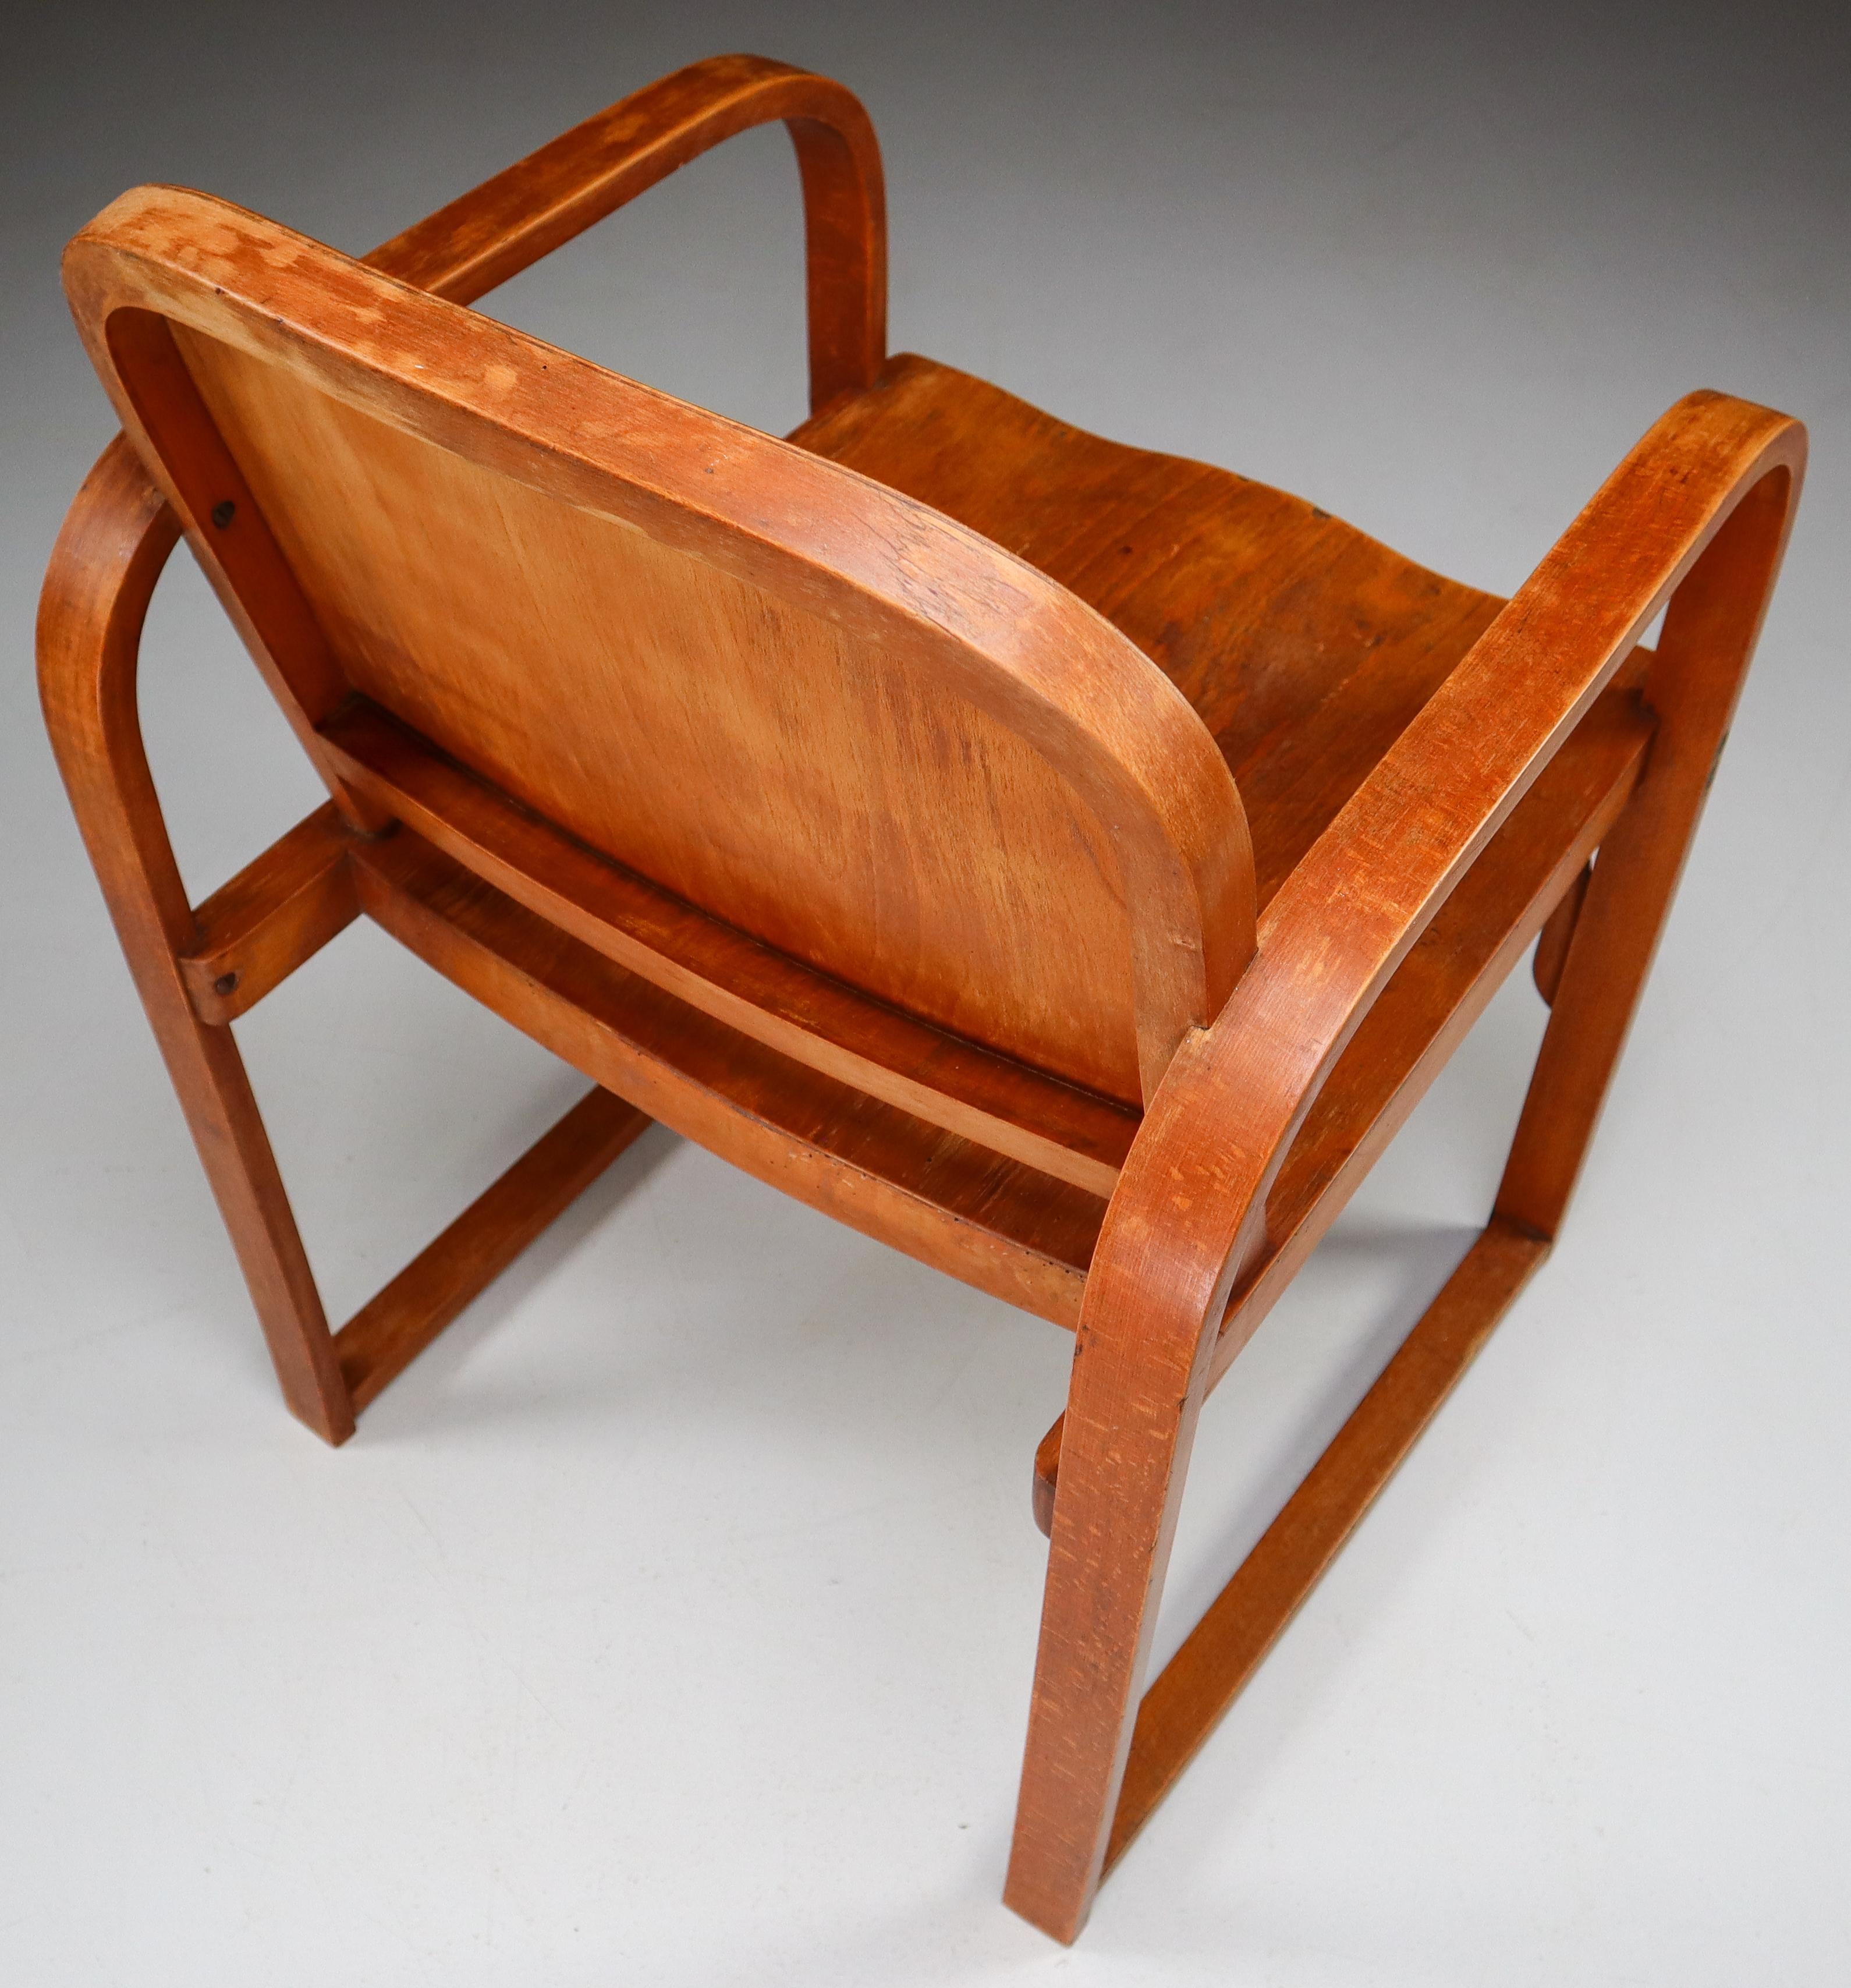 20th Century Modernist Set of Four Bauhaus Bentwood Armchairs Made by Tatra in Praque, 1930s